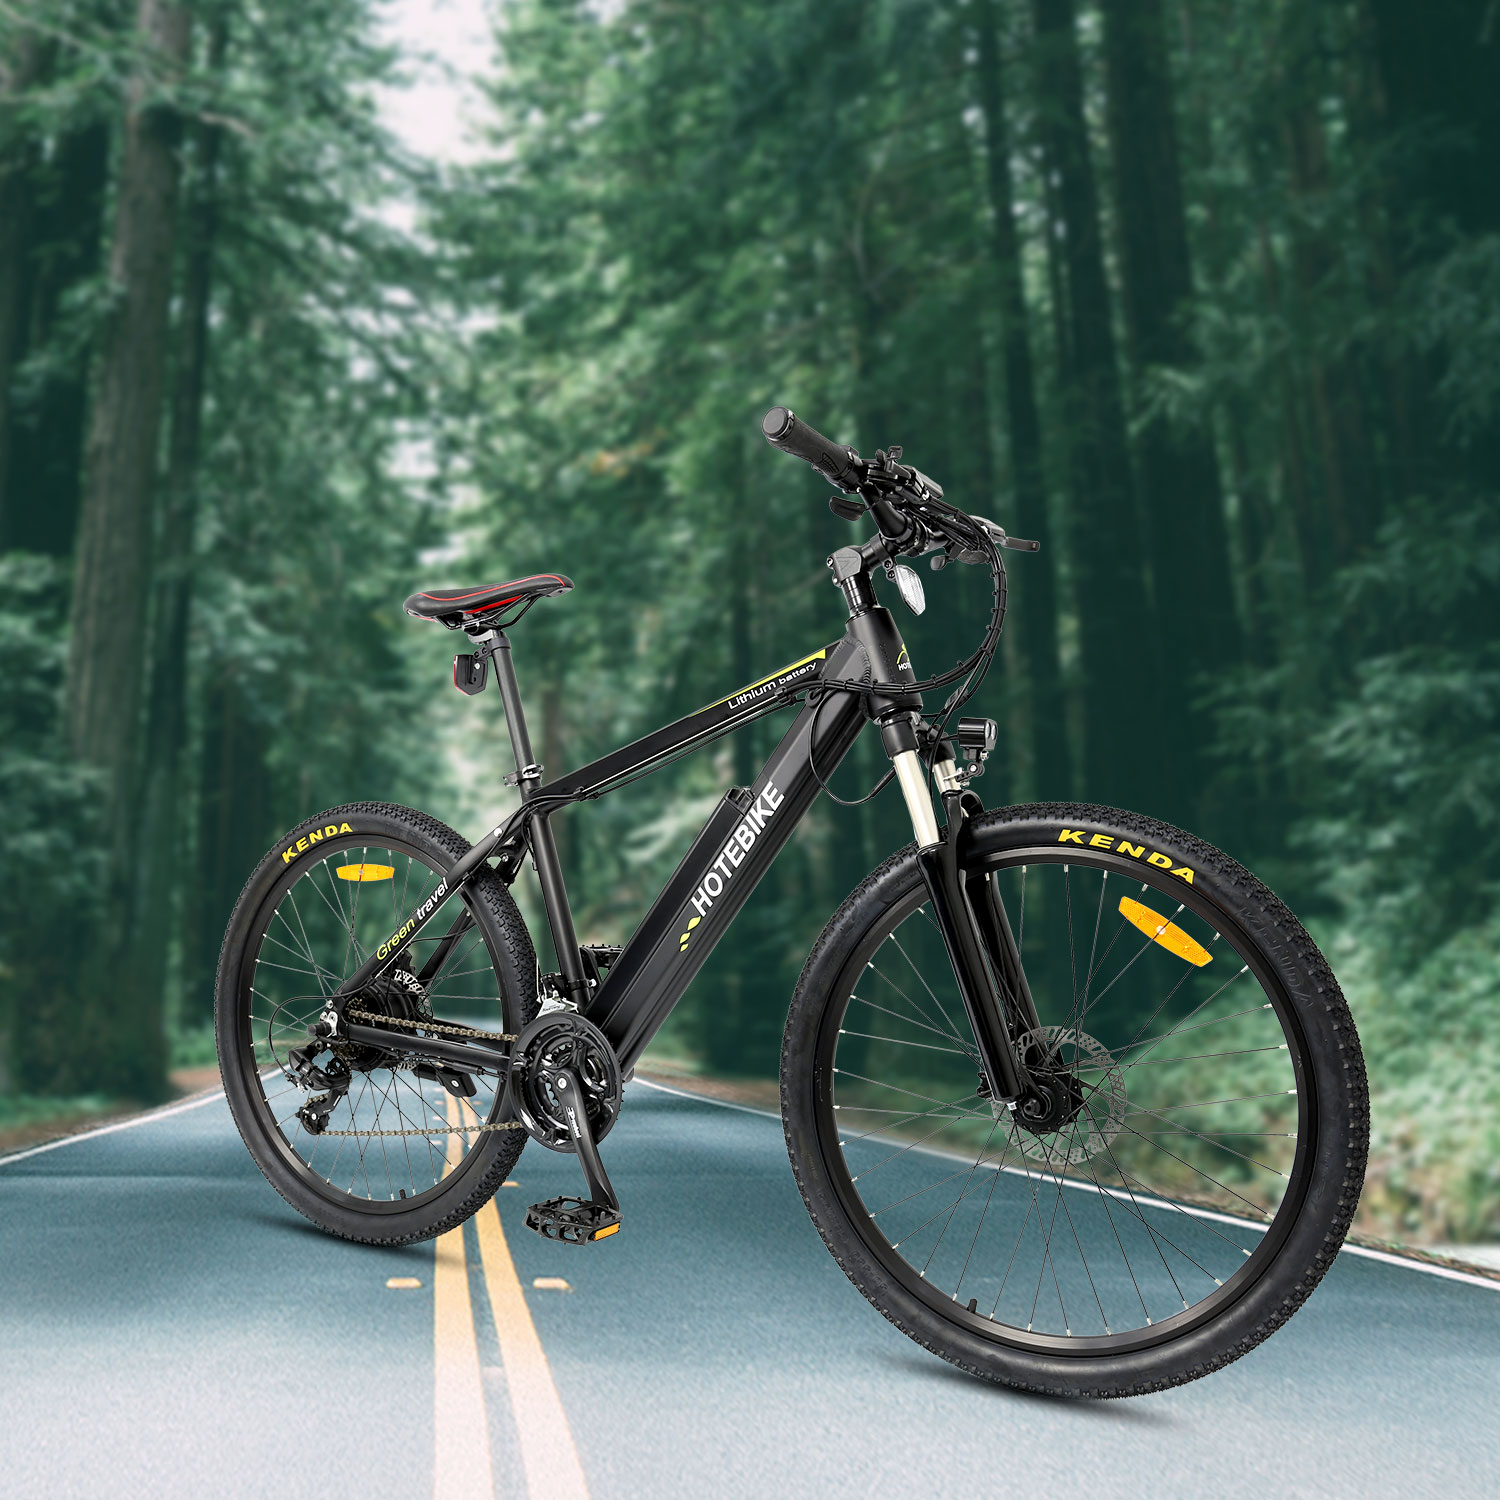 E-Mountain Bike Market Competitive Research And Precise Outlook 2020 To 2028 - blog - 2